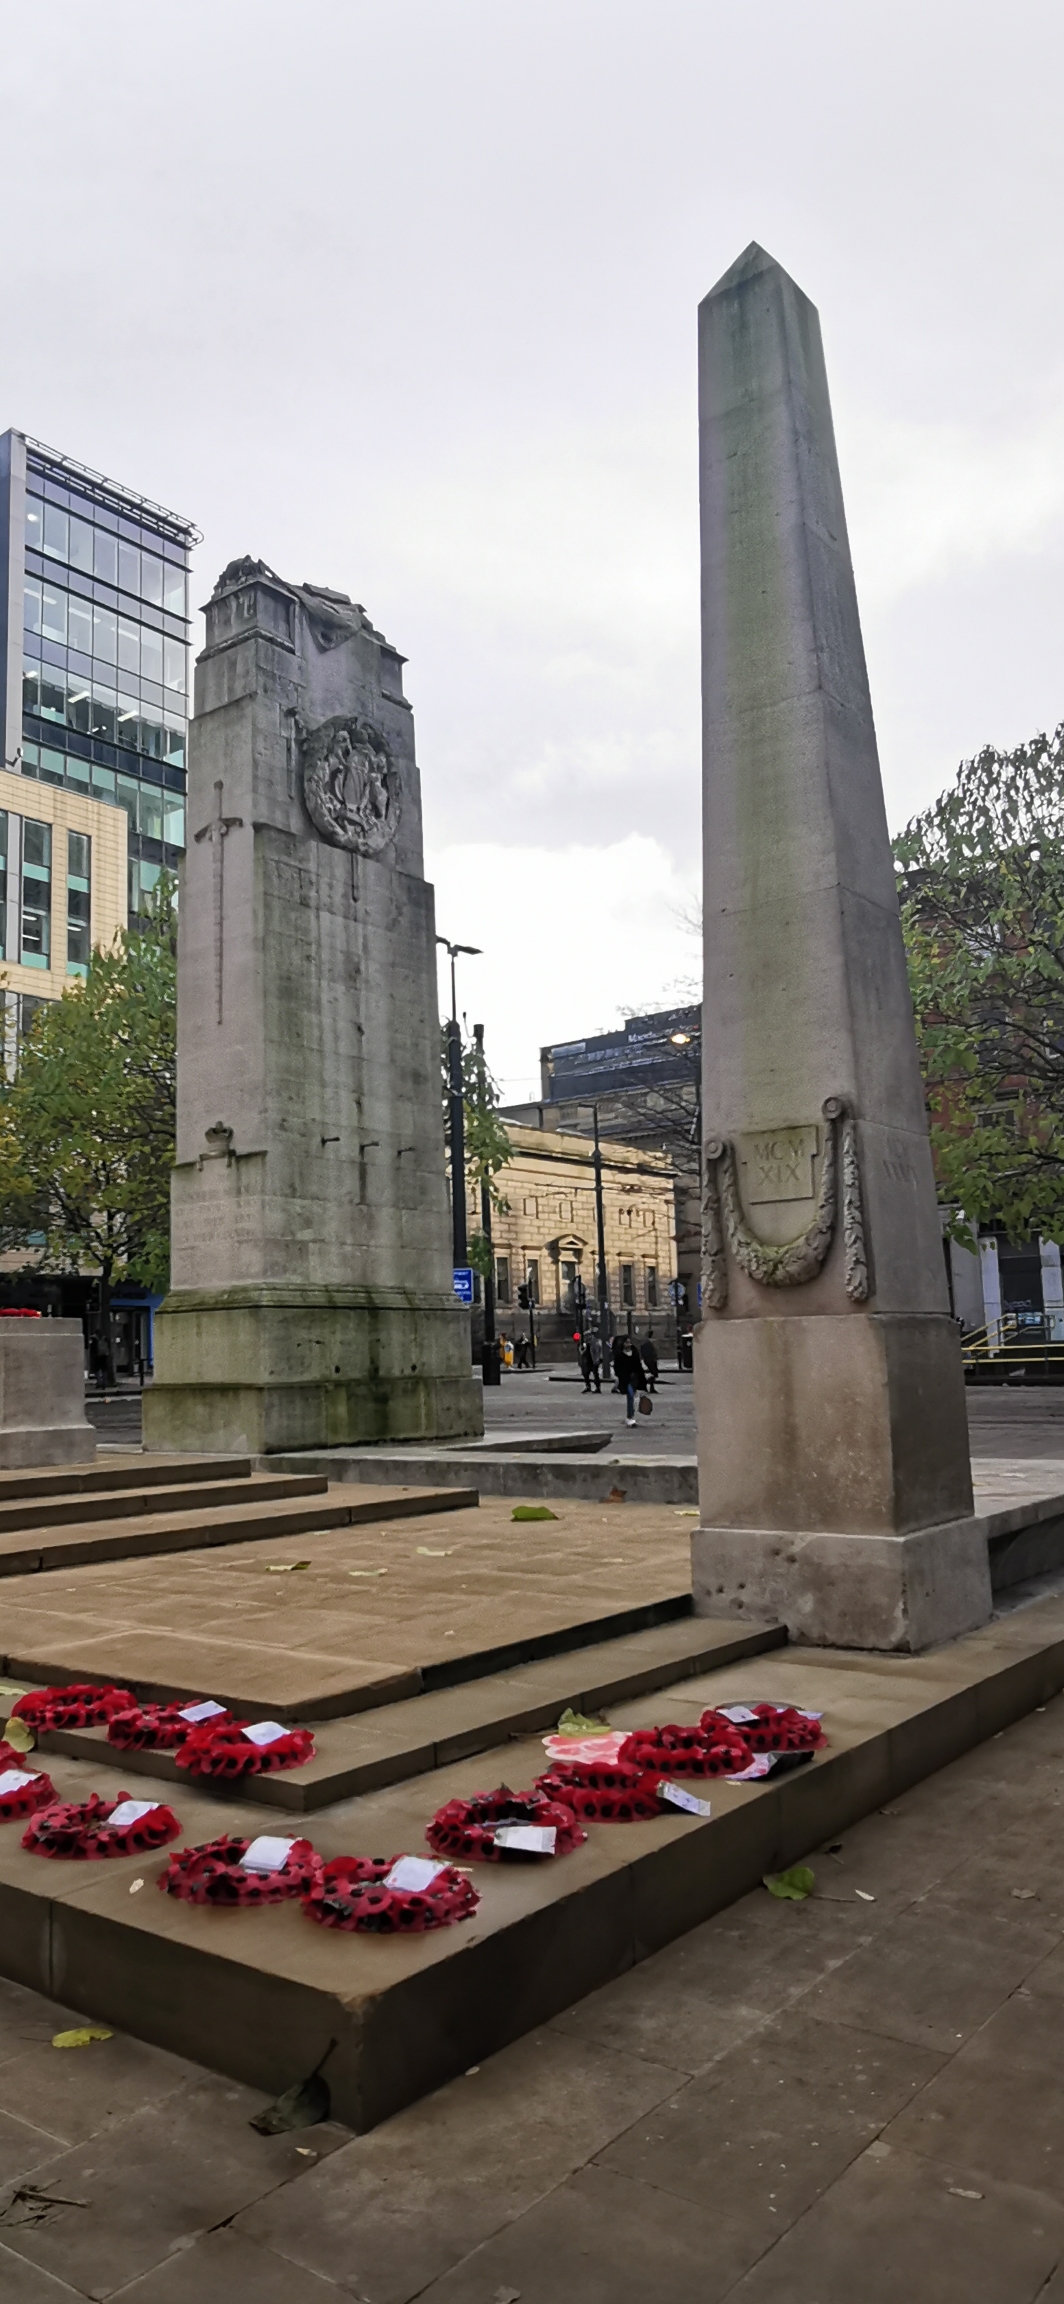 Photo taken between Town Hall Extension and Cenotaph